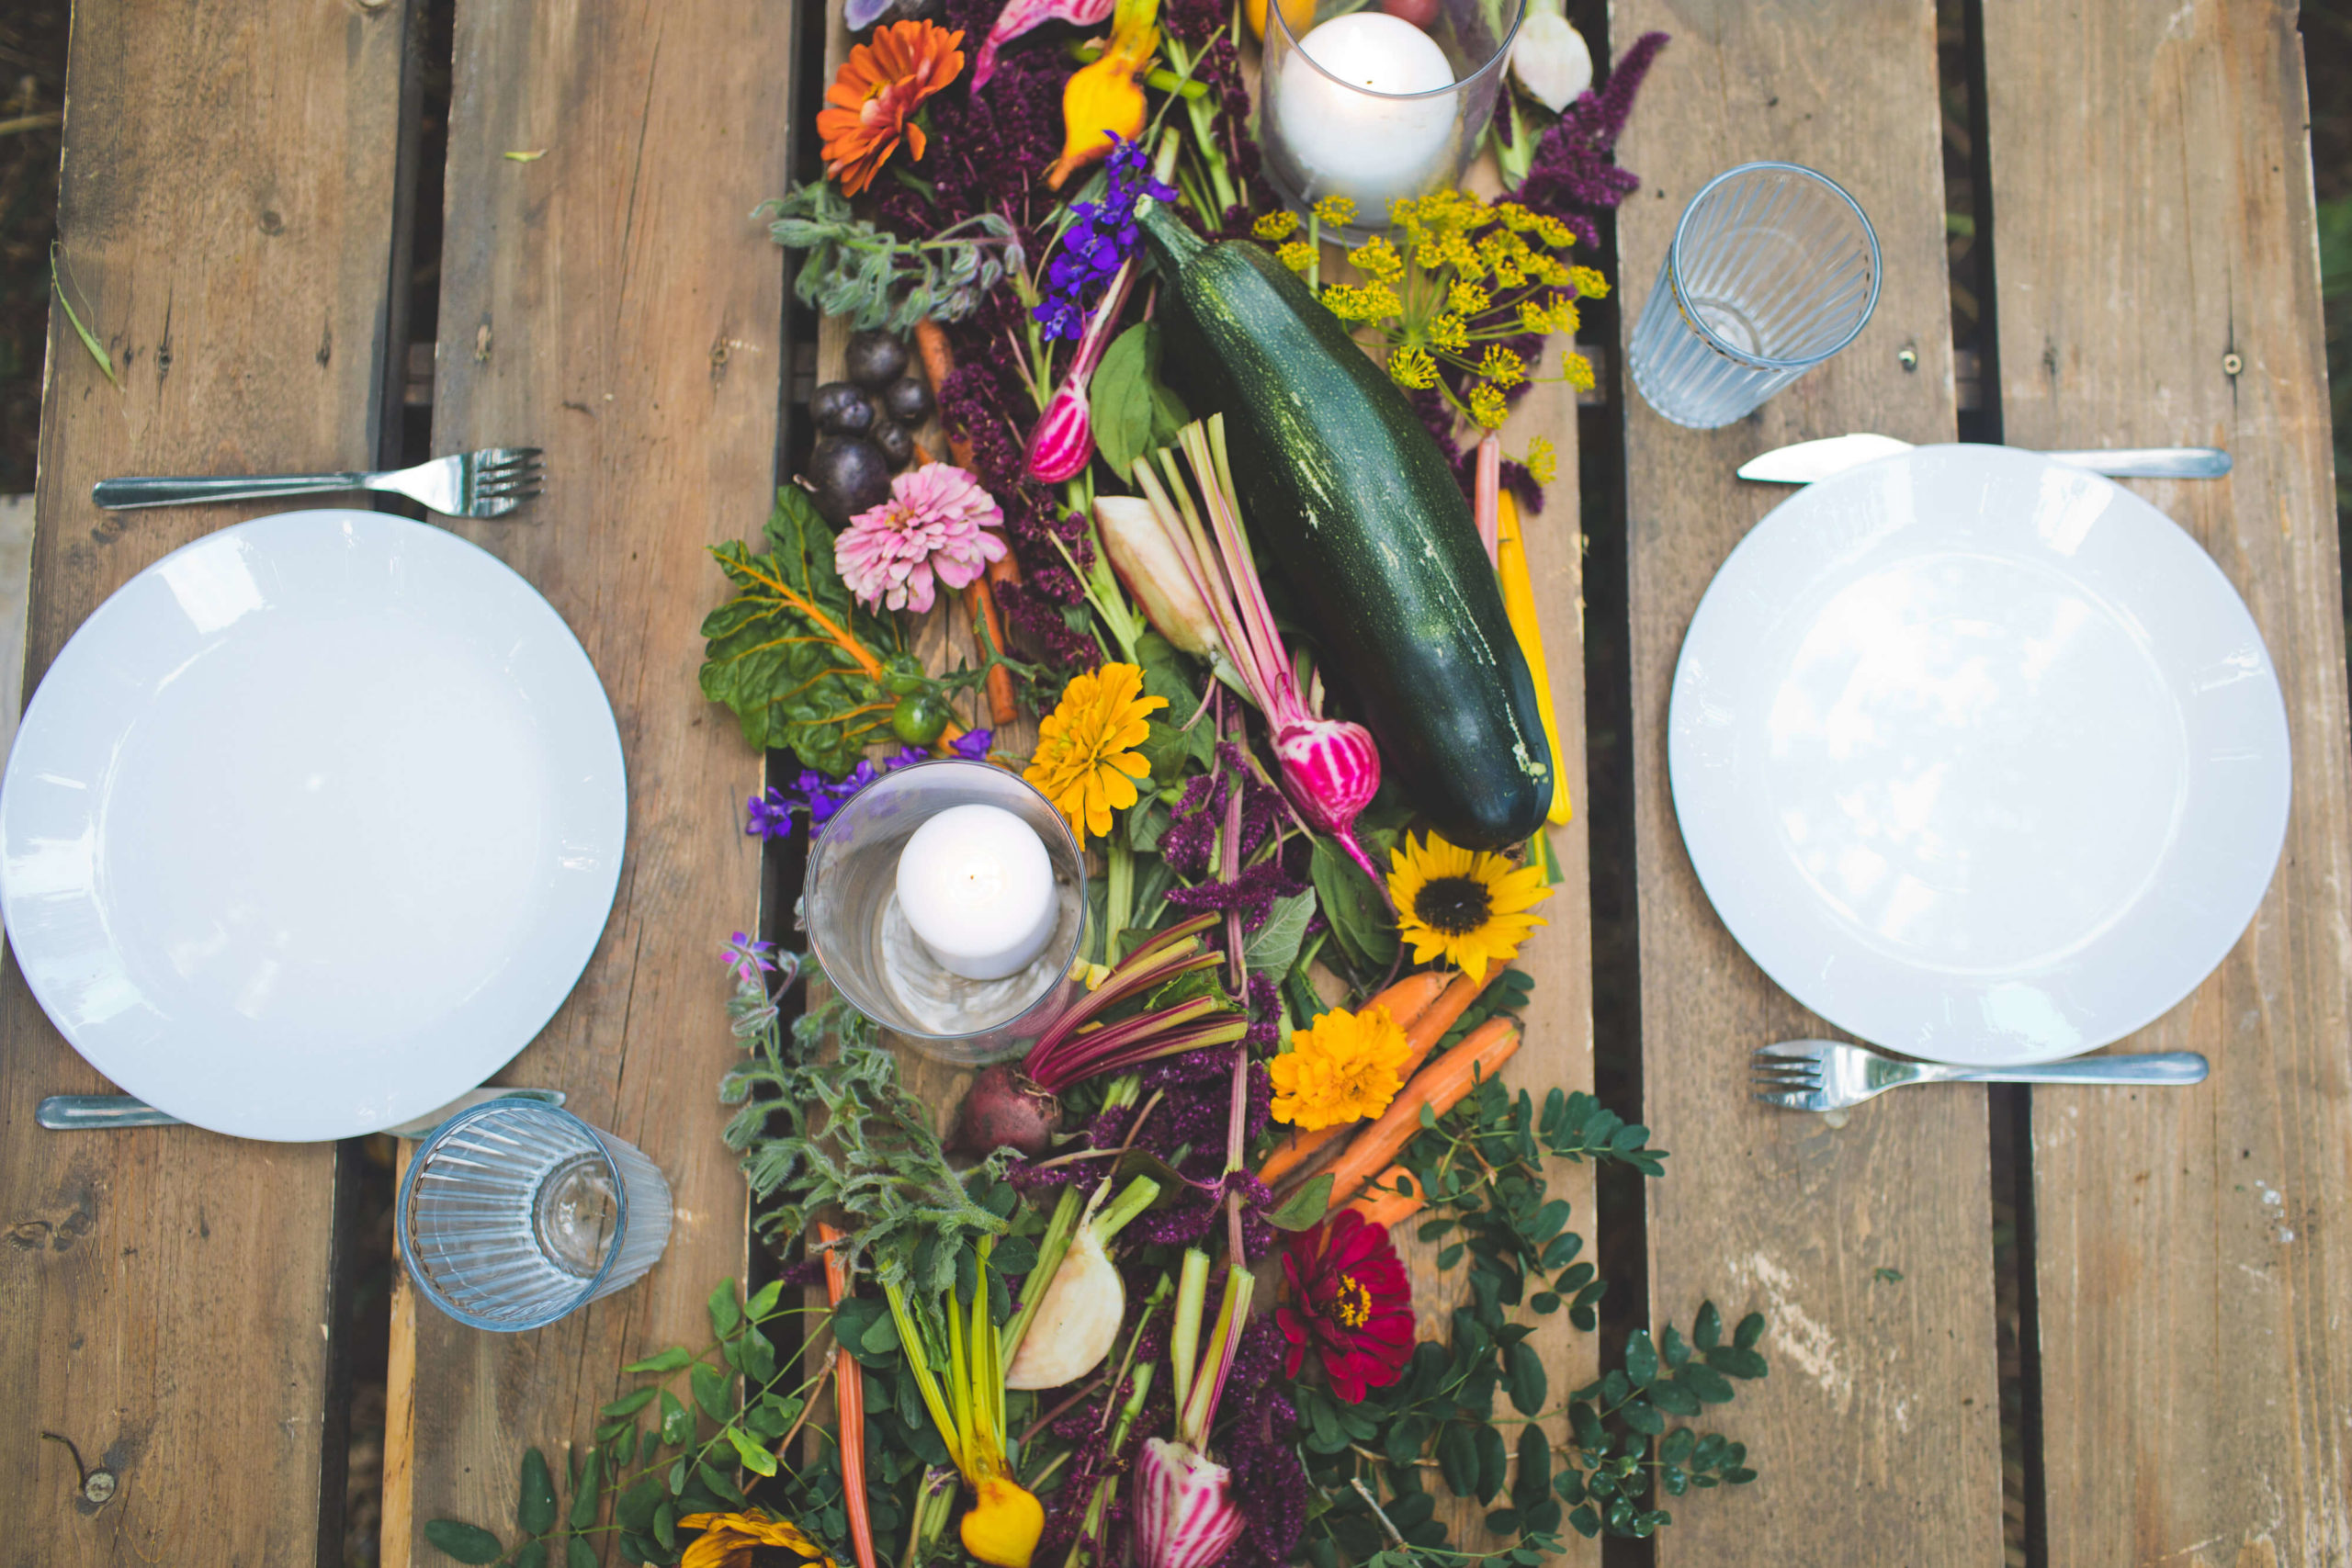 A farm to table food experience featuring a table set with plates and locally sourced vegetables on a wooden table.